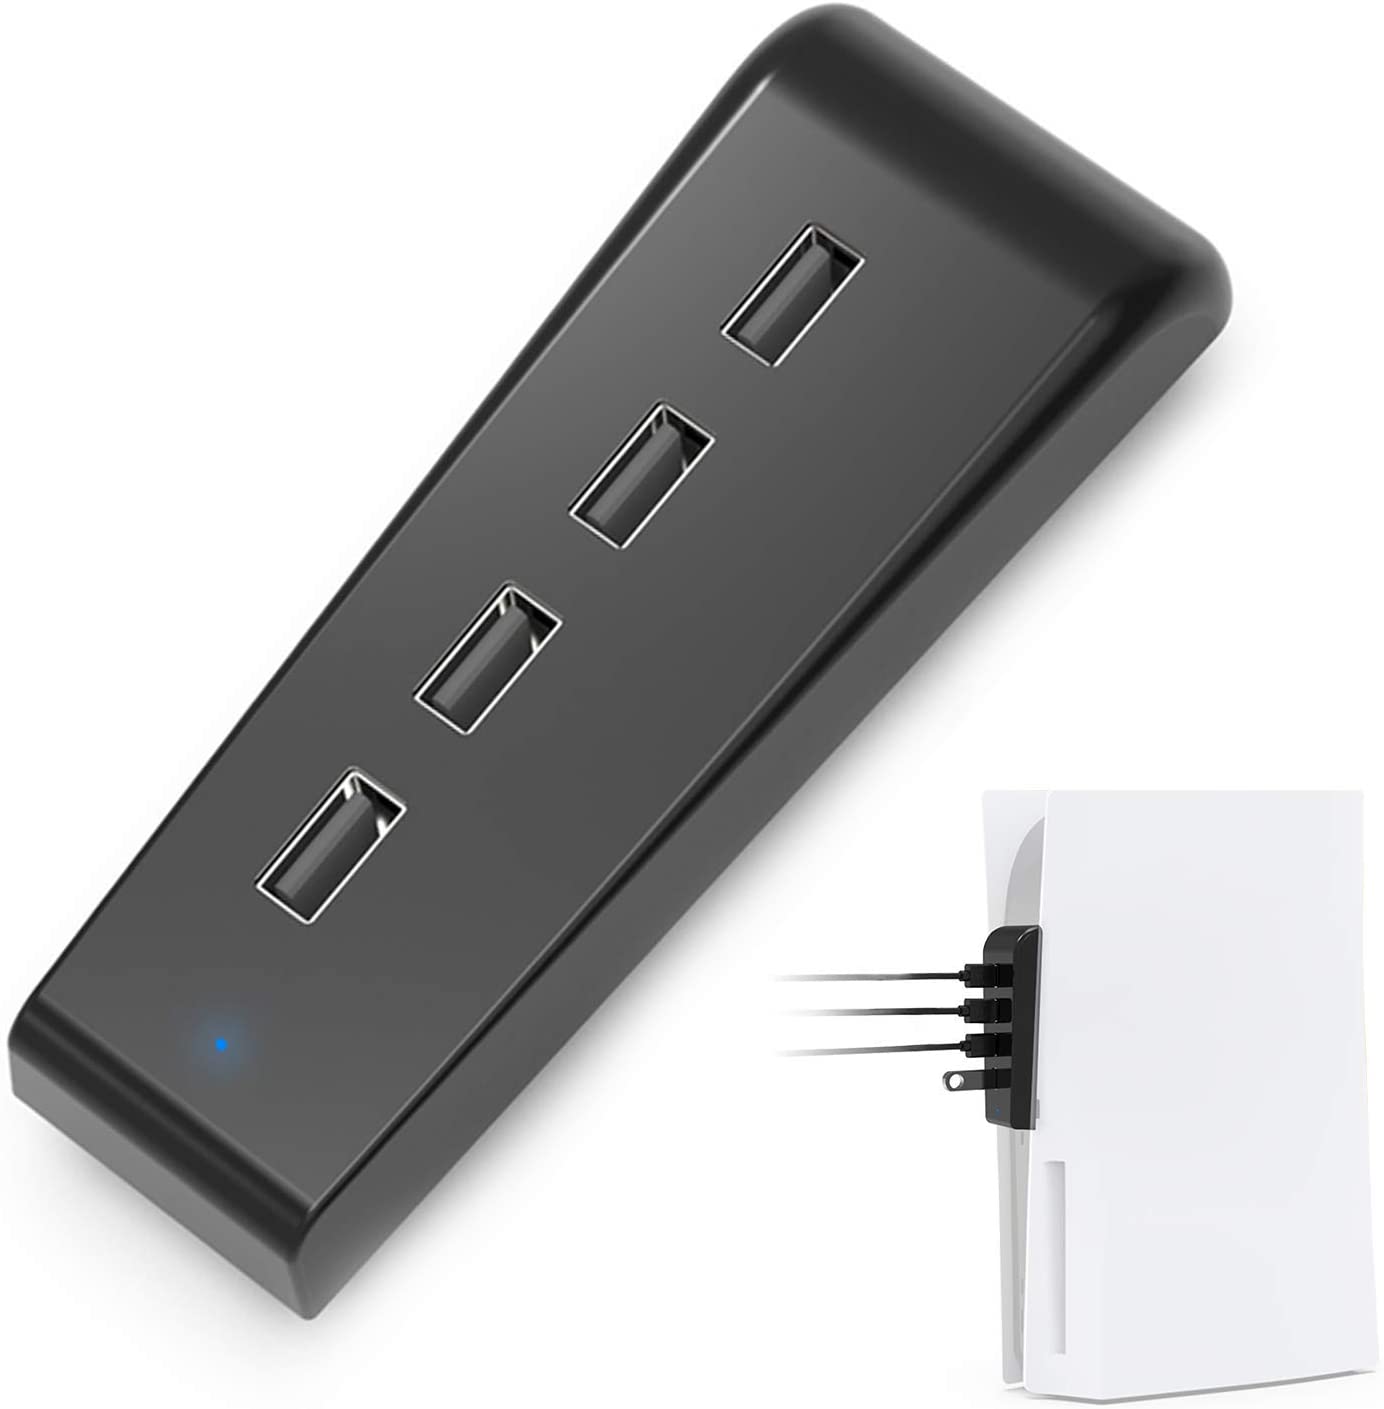 4-port USB hub, compatible with PS5 console for expanded connectivity.